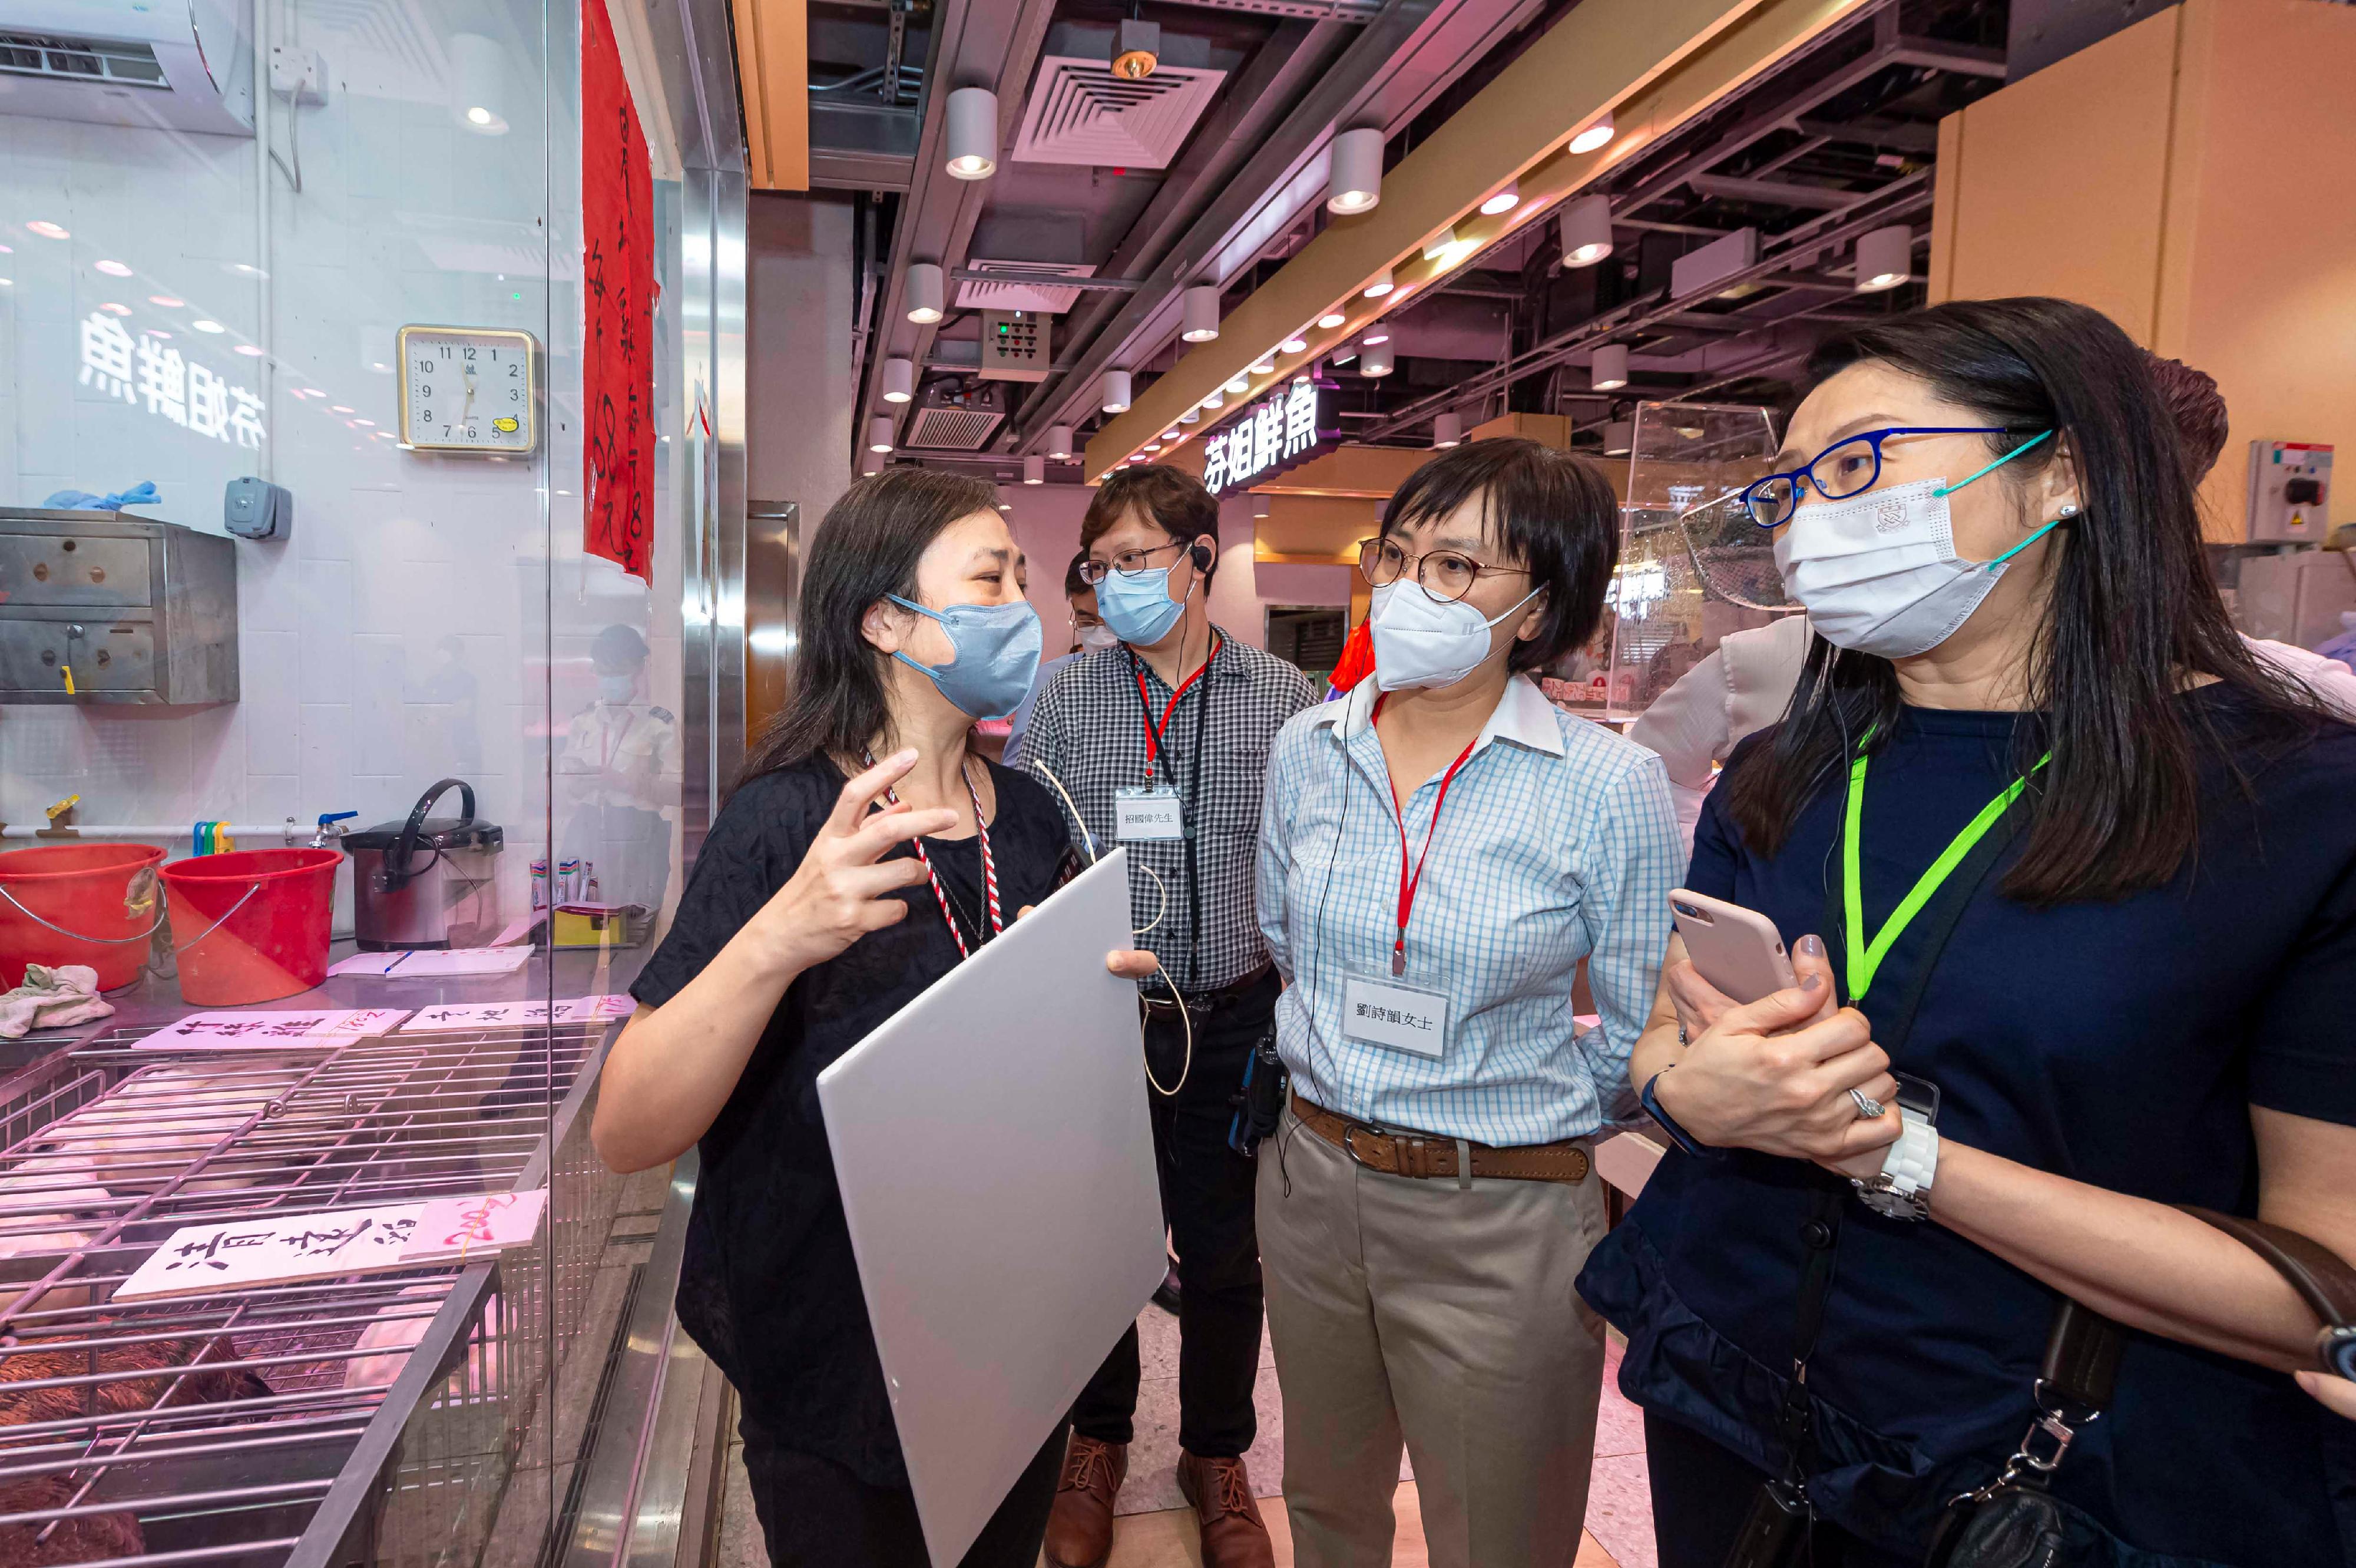 Members of the Hong Kong Housing Authority (HA) and its Commercial Properties Committee (CPC) today (August 2) visited the HA's non-domestic facilities. Photo shows the Chairman of the HA's CPC, Ms Serena Lau (second right), and the members of HA/CPC visiting Pok Hong Market in Sha Tin after its renovation.